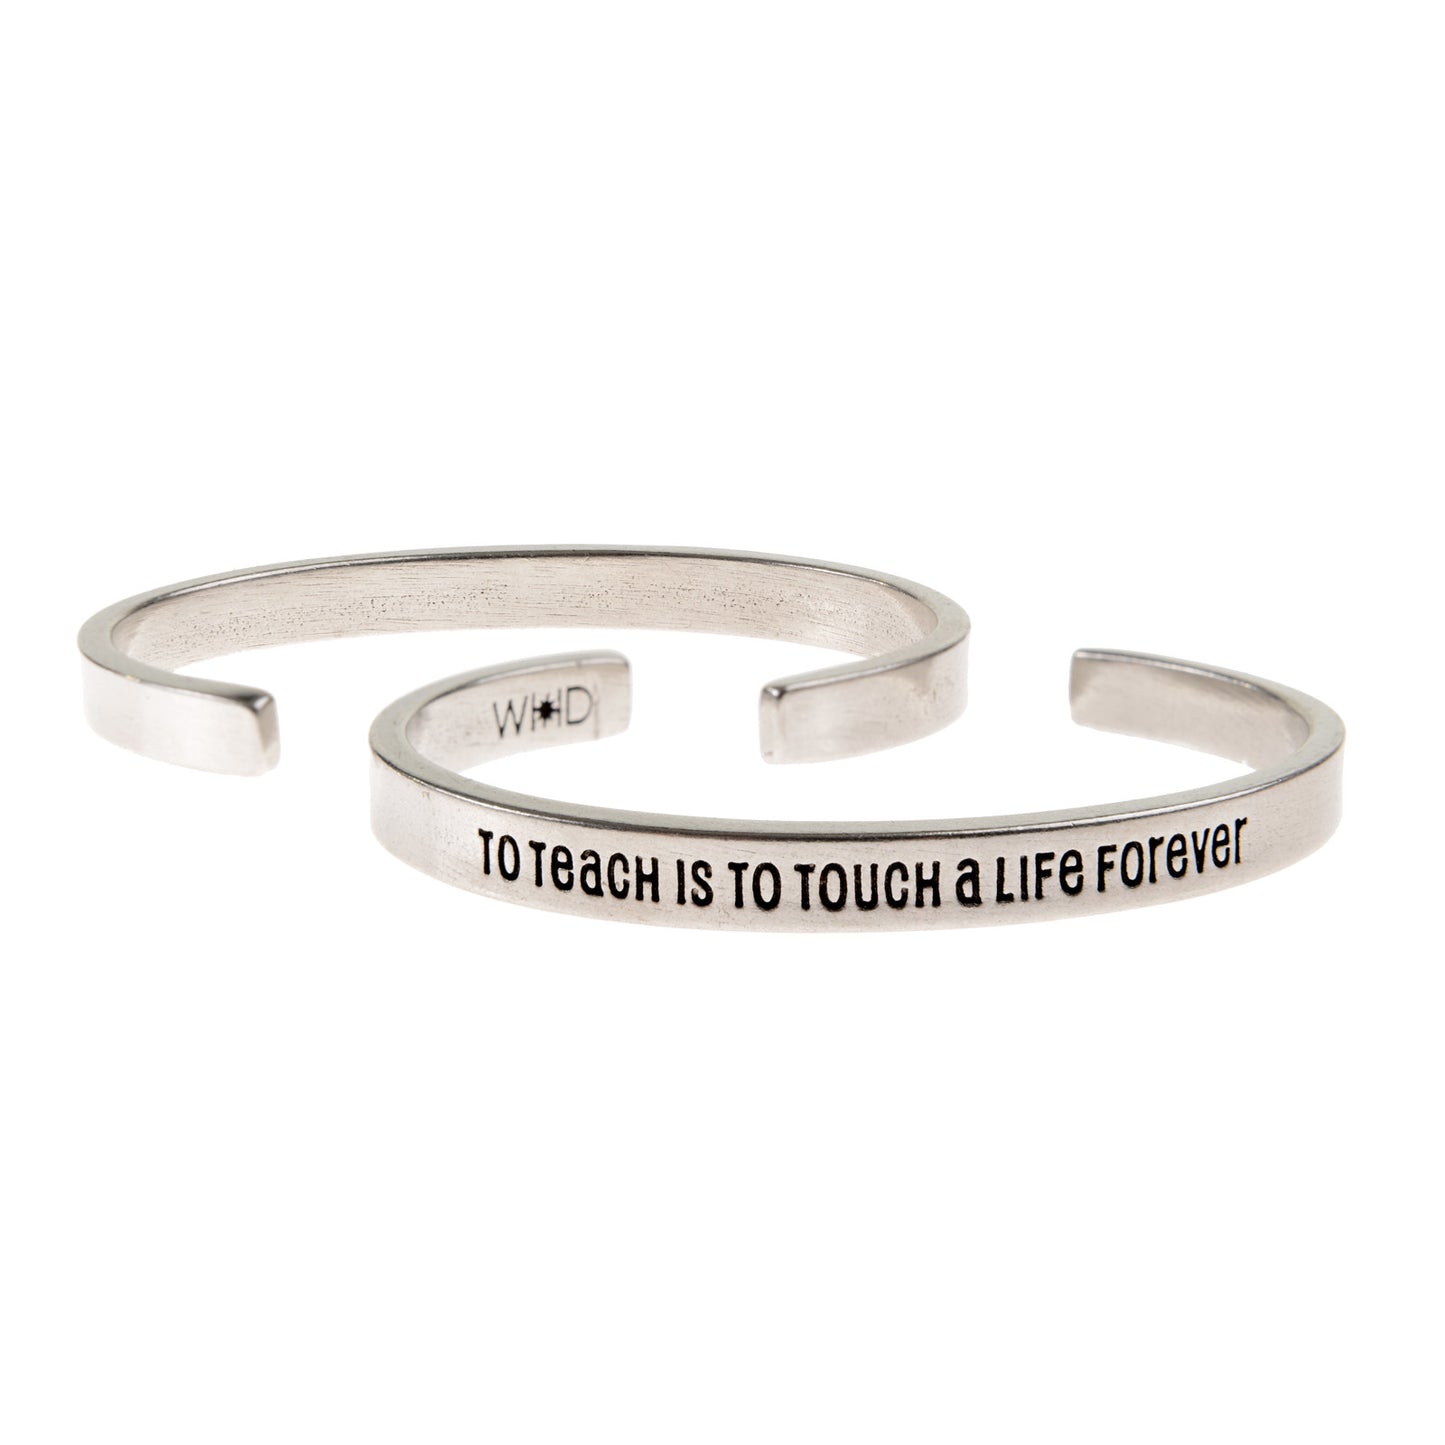 To Teach is to Touch a Life Forever Quotable Cuff Bracelet